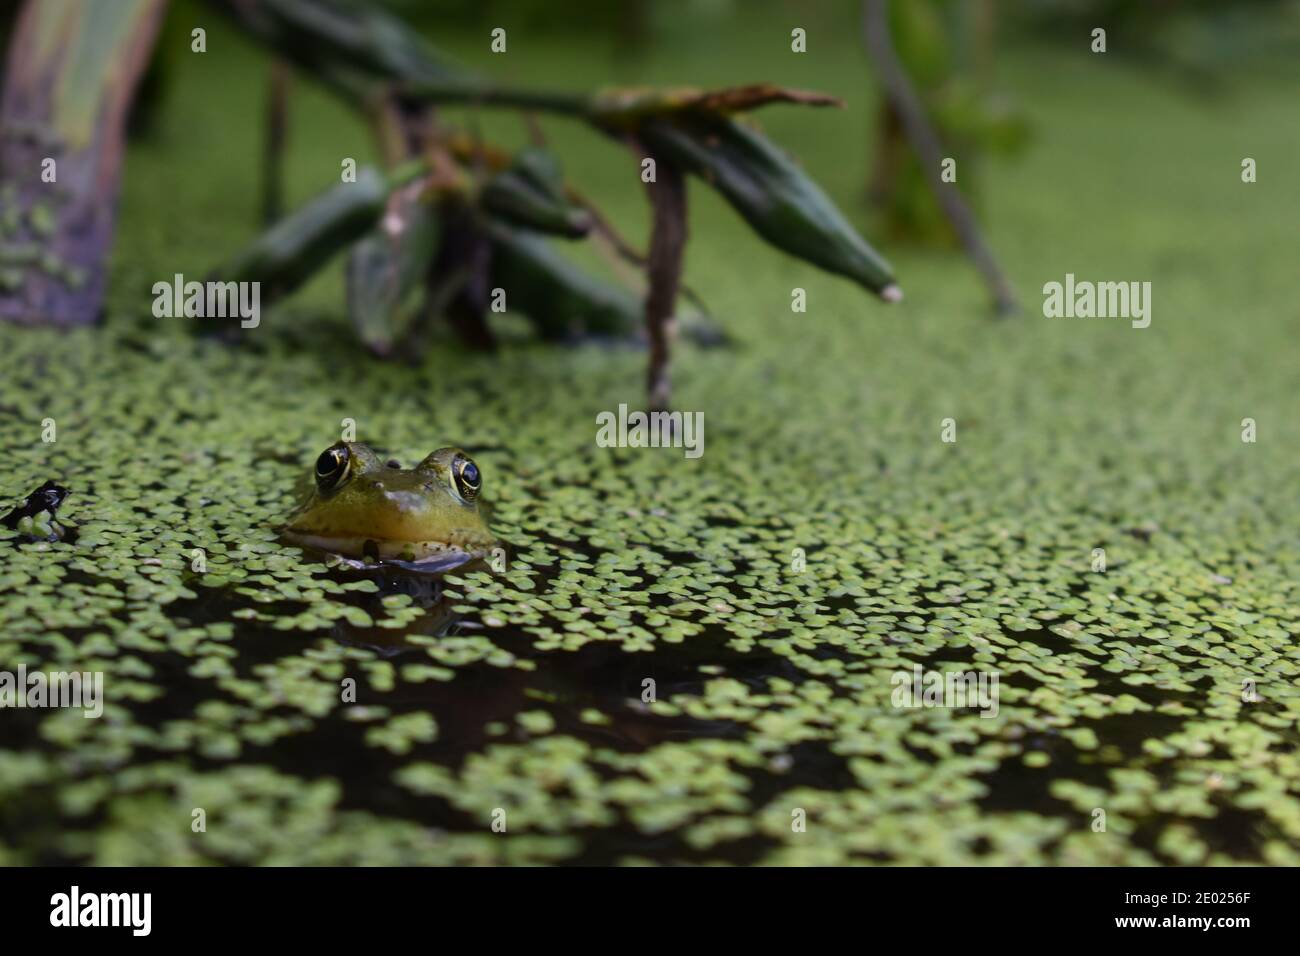 A frog poking its head out of a pond Stock Photo